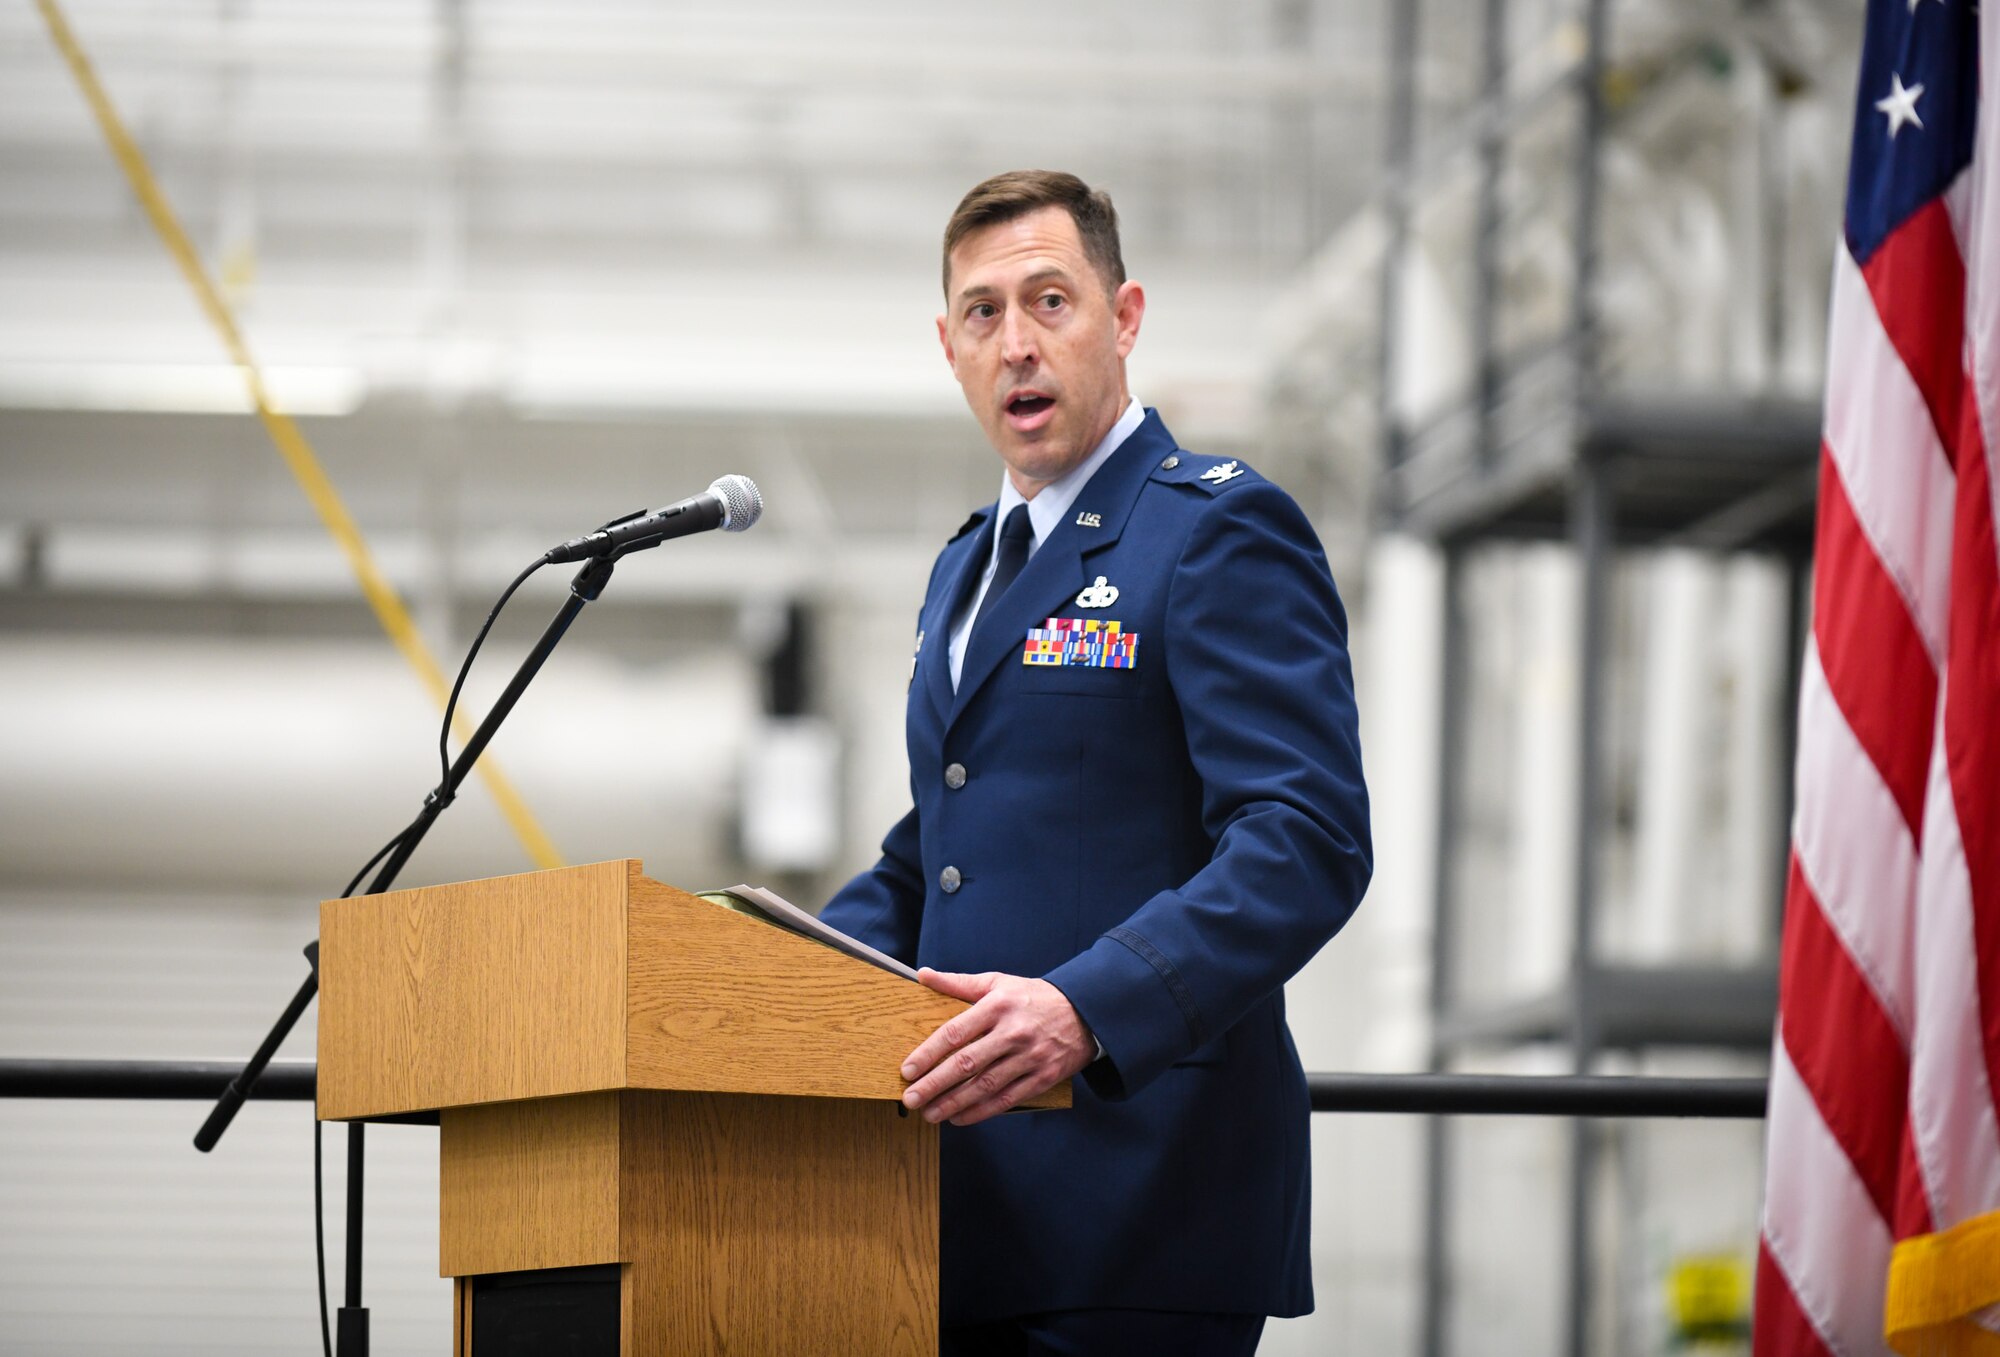 Col. Greg Meyer, commander of the 910th Mission Support Group, introduces Maj. Robert Lytle as the incoming commander of the 76th Aerial Port Squadron during an assumption of command ceremony, Nov. 6, 2021, at Youngstown Air Reserve Station, Ohio.